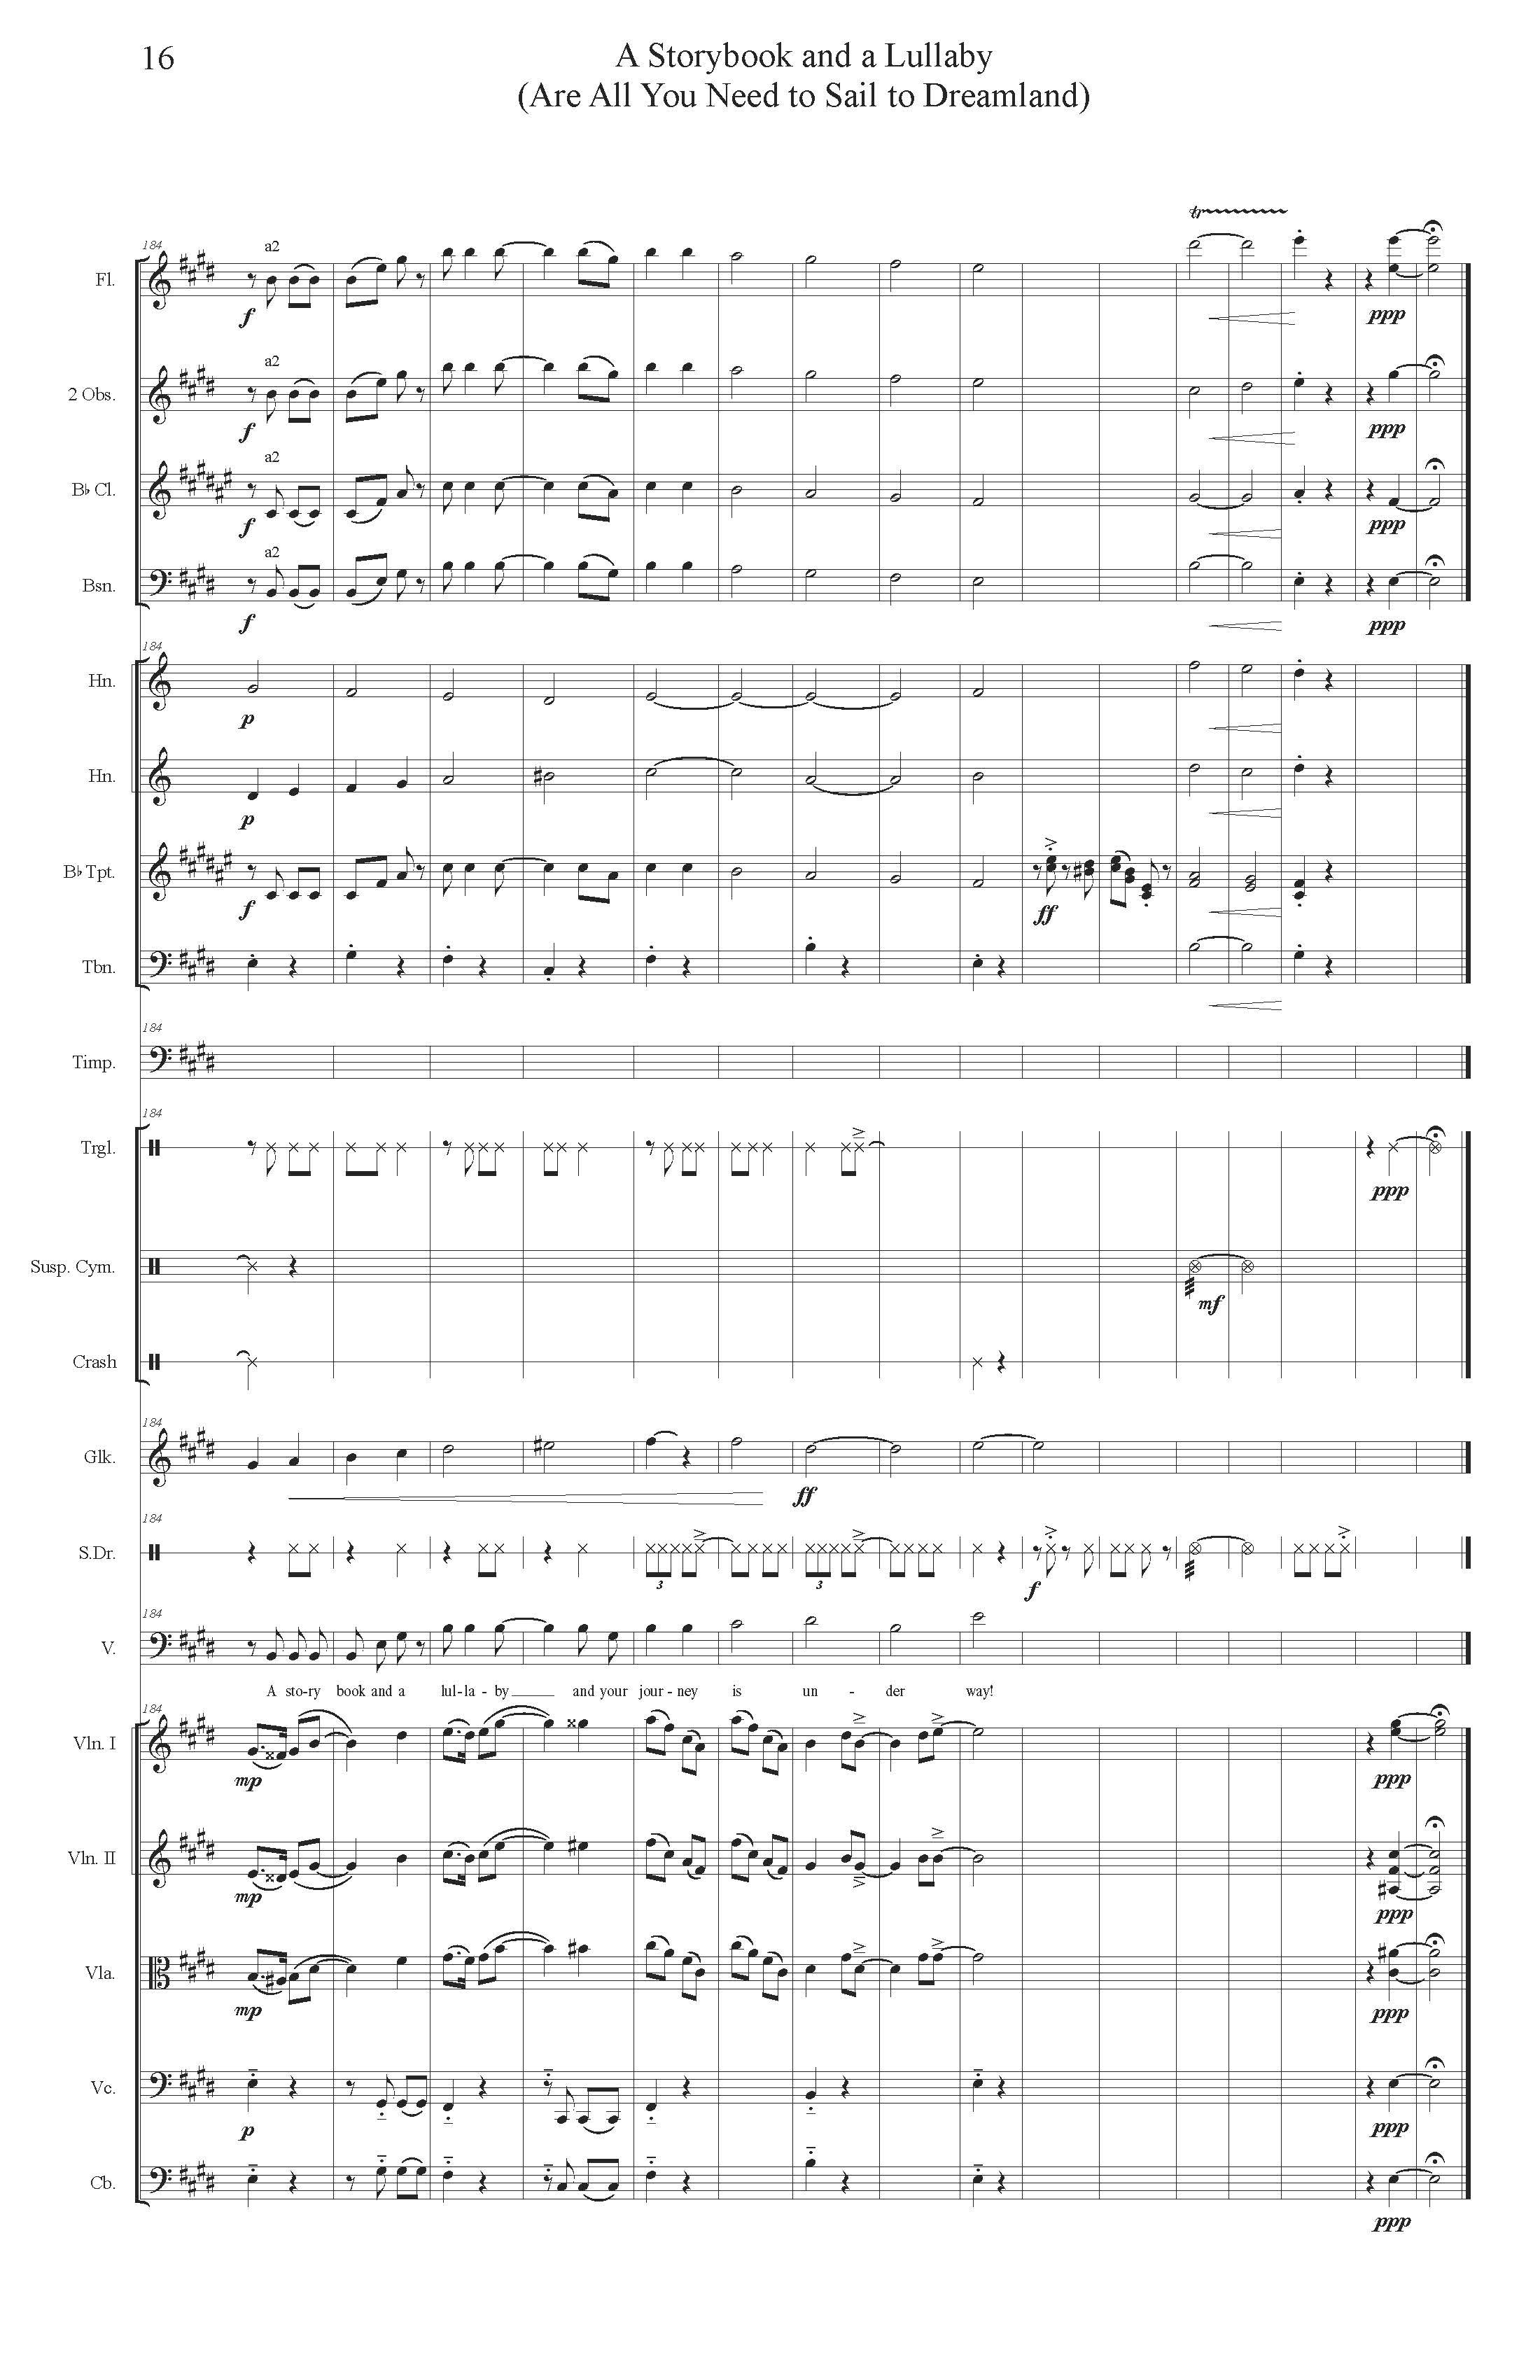 A STORYBOOK AND A LULLABY ORCH - Score_Page_16.jpg